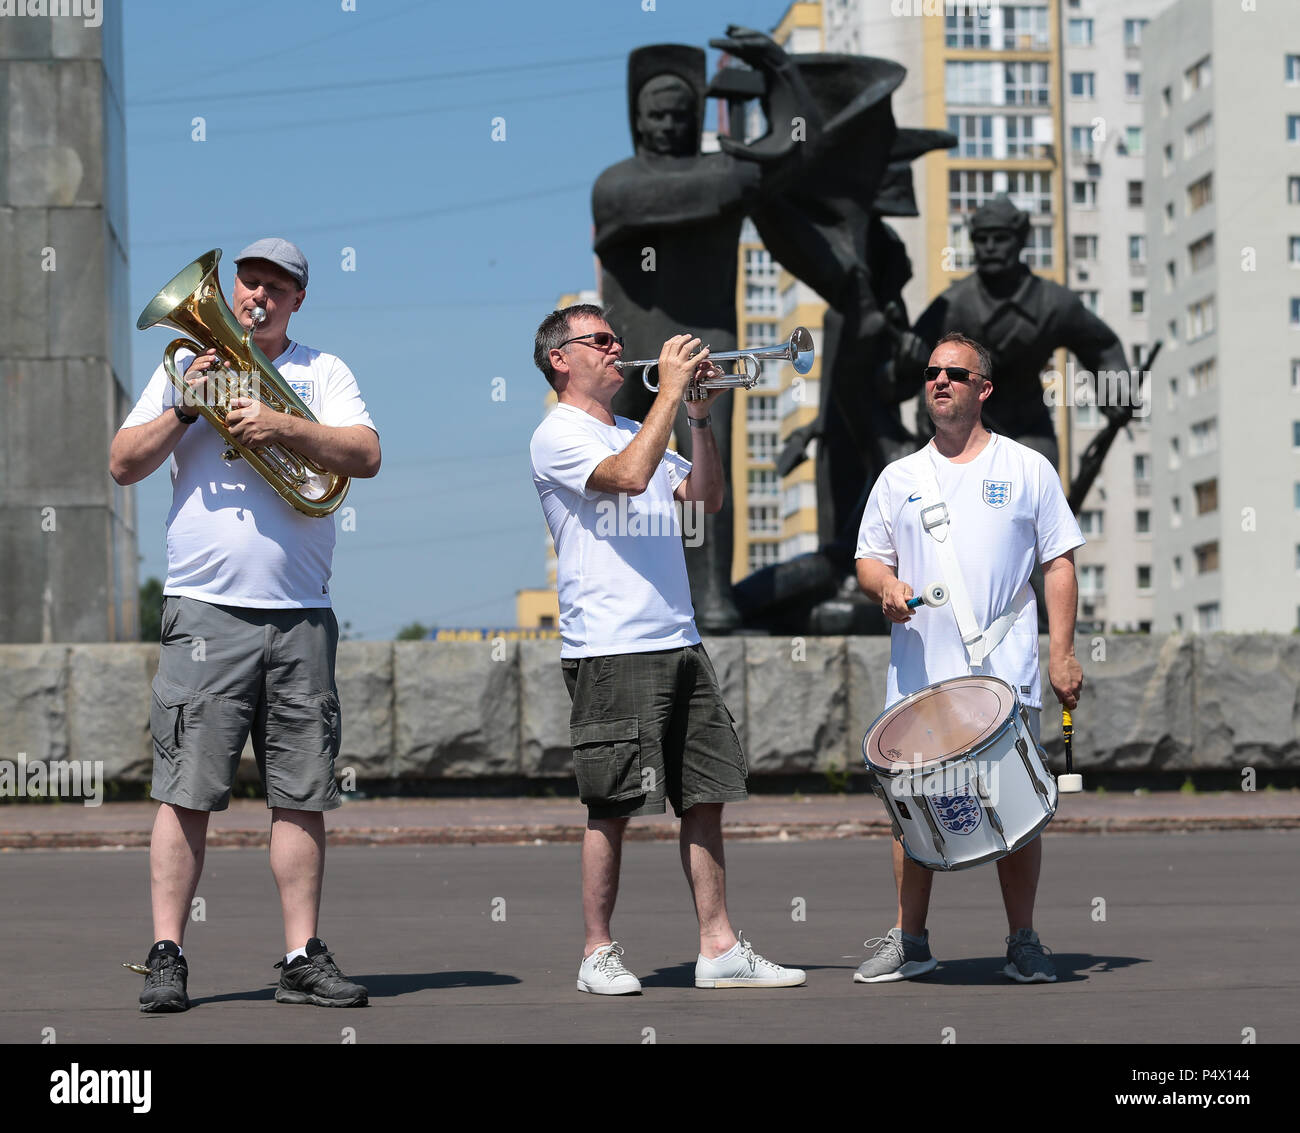 (left to right) Steve Wood 54, John Hemmingham 55 and Steve Homes 47 of the England Band in Lenin Square, Nizhny Novgorod ahead of England's second World Cup Group G game in the 2018 FIFA World Cup in Russia. Stock Photo